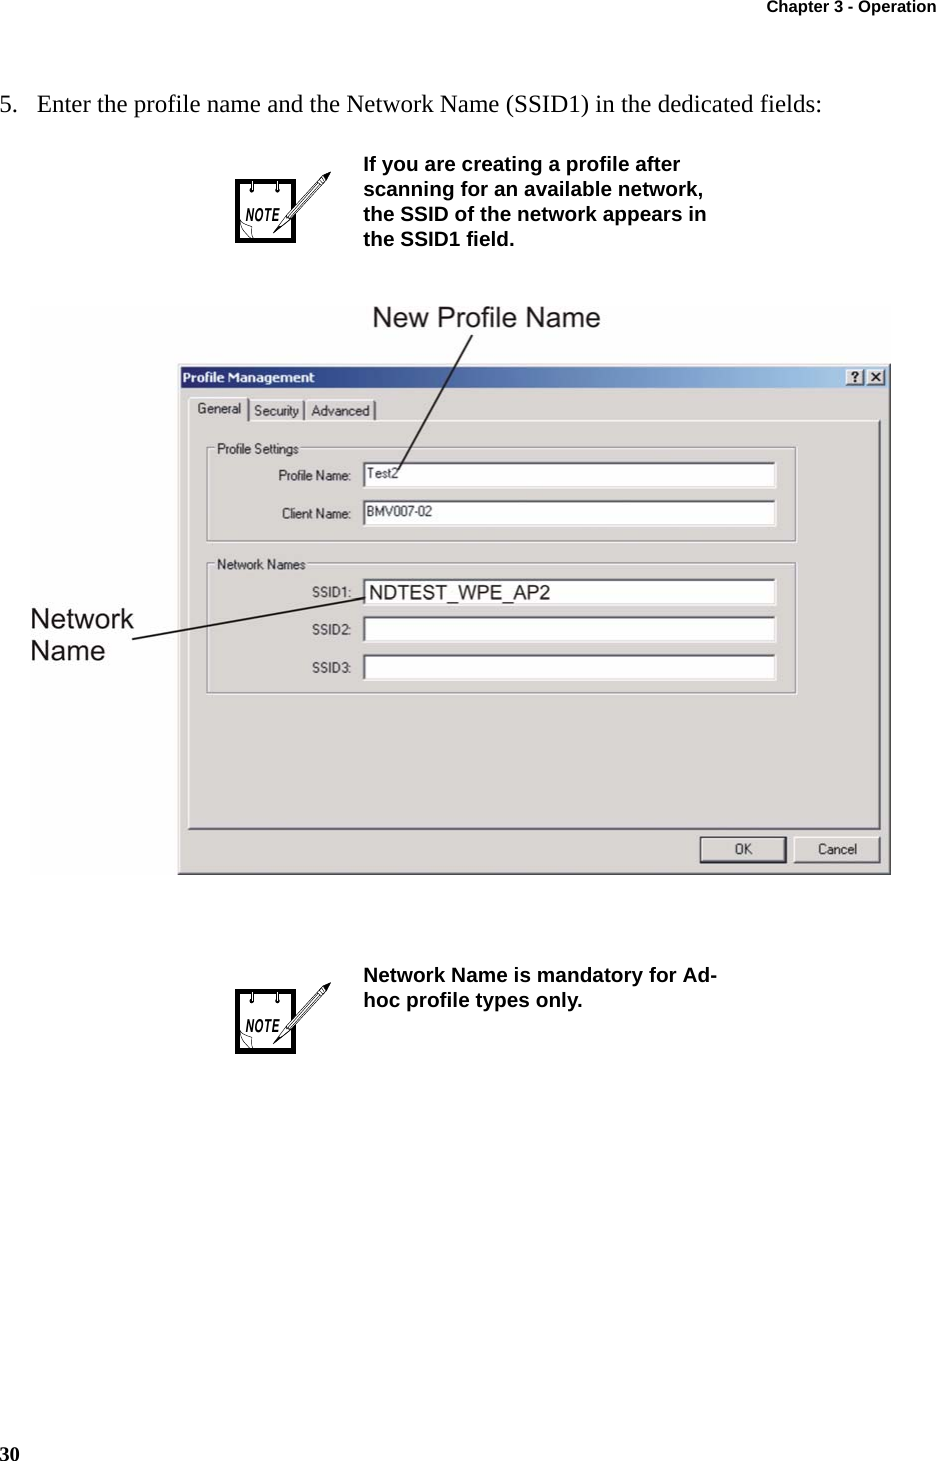 Chapter 3 - Operation305. Enter the profile name and the Network Name (SSID1) in the dedicated fields:If you are creating a profile after scanning for an available network, the SSID of the network appears in the SSID1 field.Network Name is mandatory for Ad-hoc profile types only.NOTENOTE